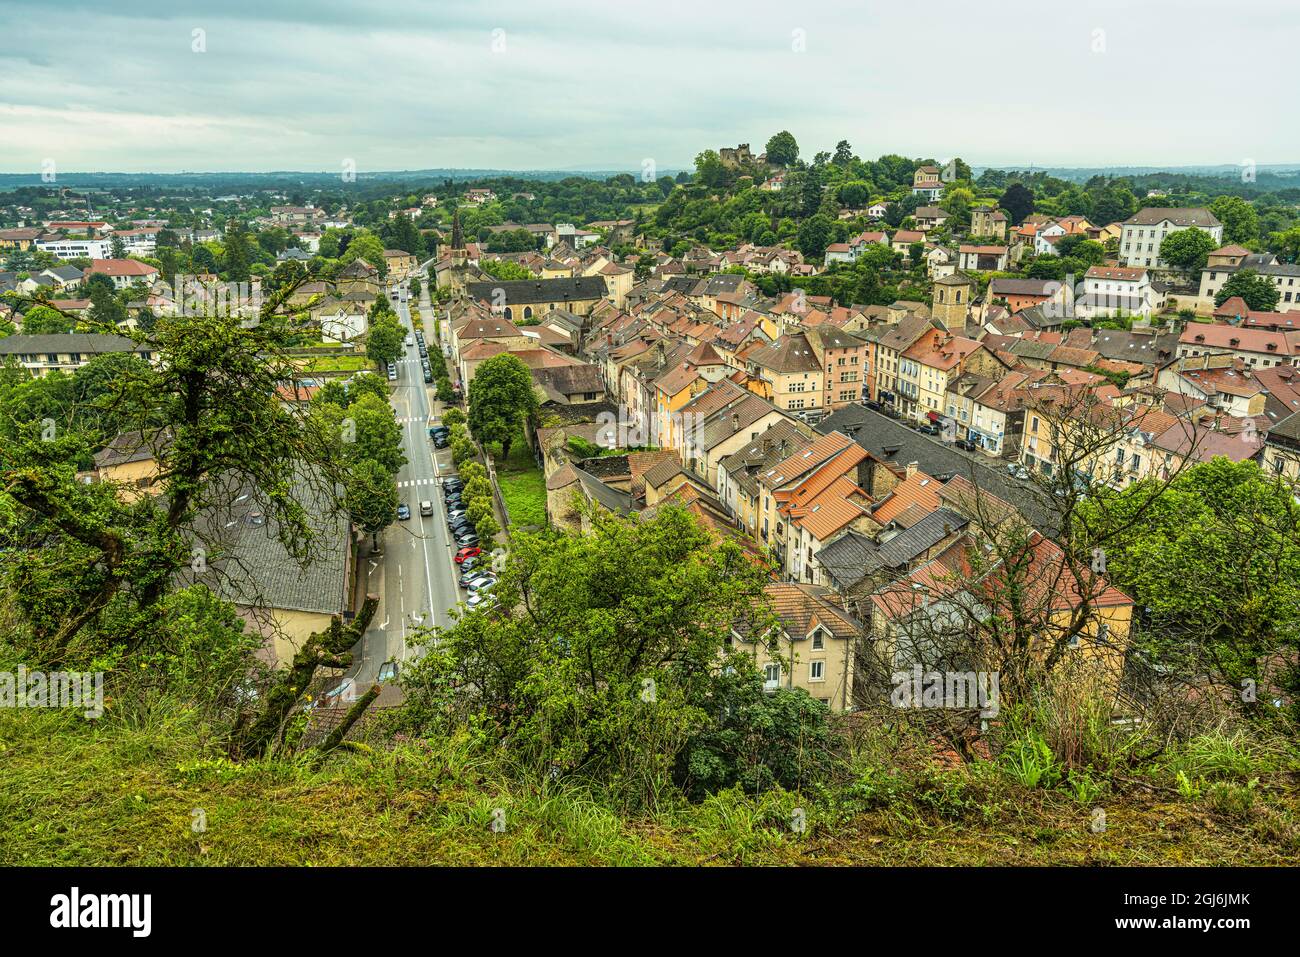 The city of Crèmieu in France seen from the top of the Benedictine priory of Sant Ippolito. Crémieu, Auvergne-Rhône-Alpes region,France Stock Photo